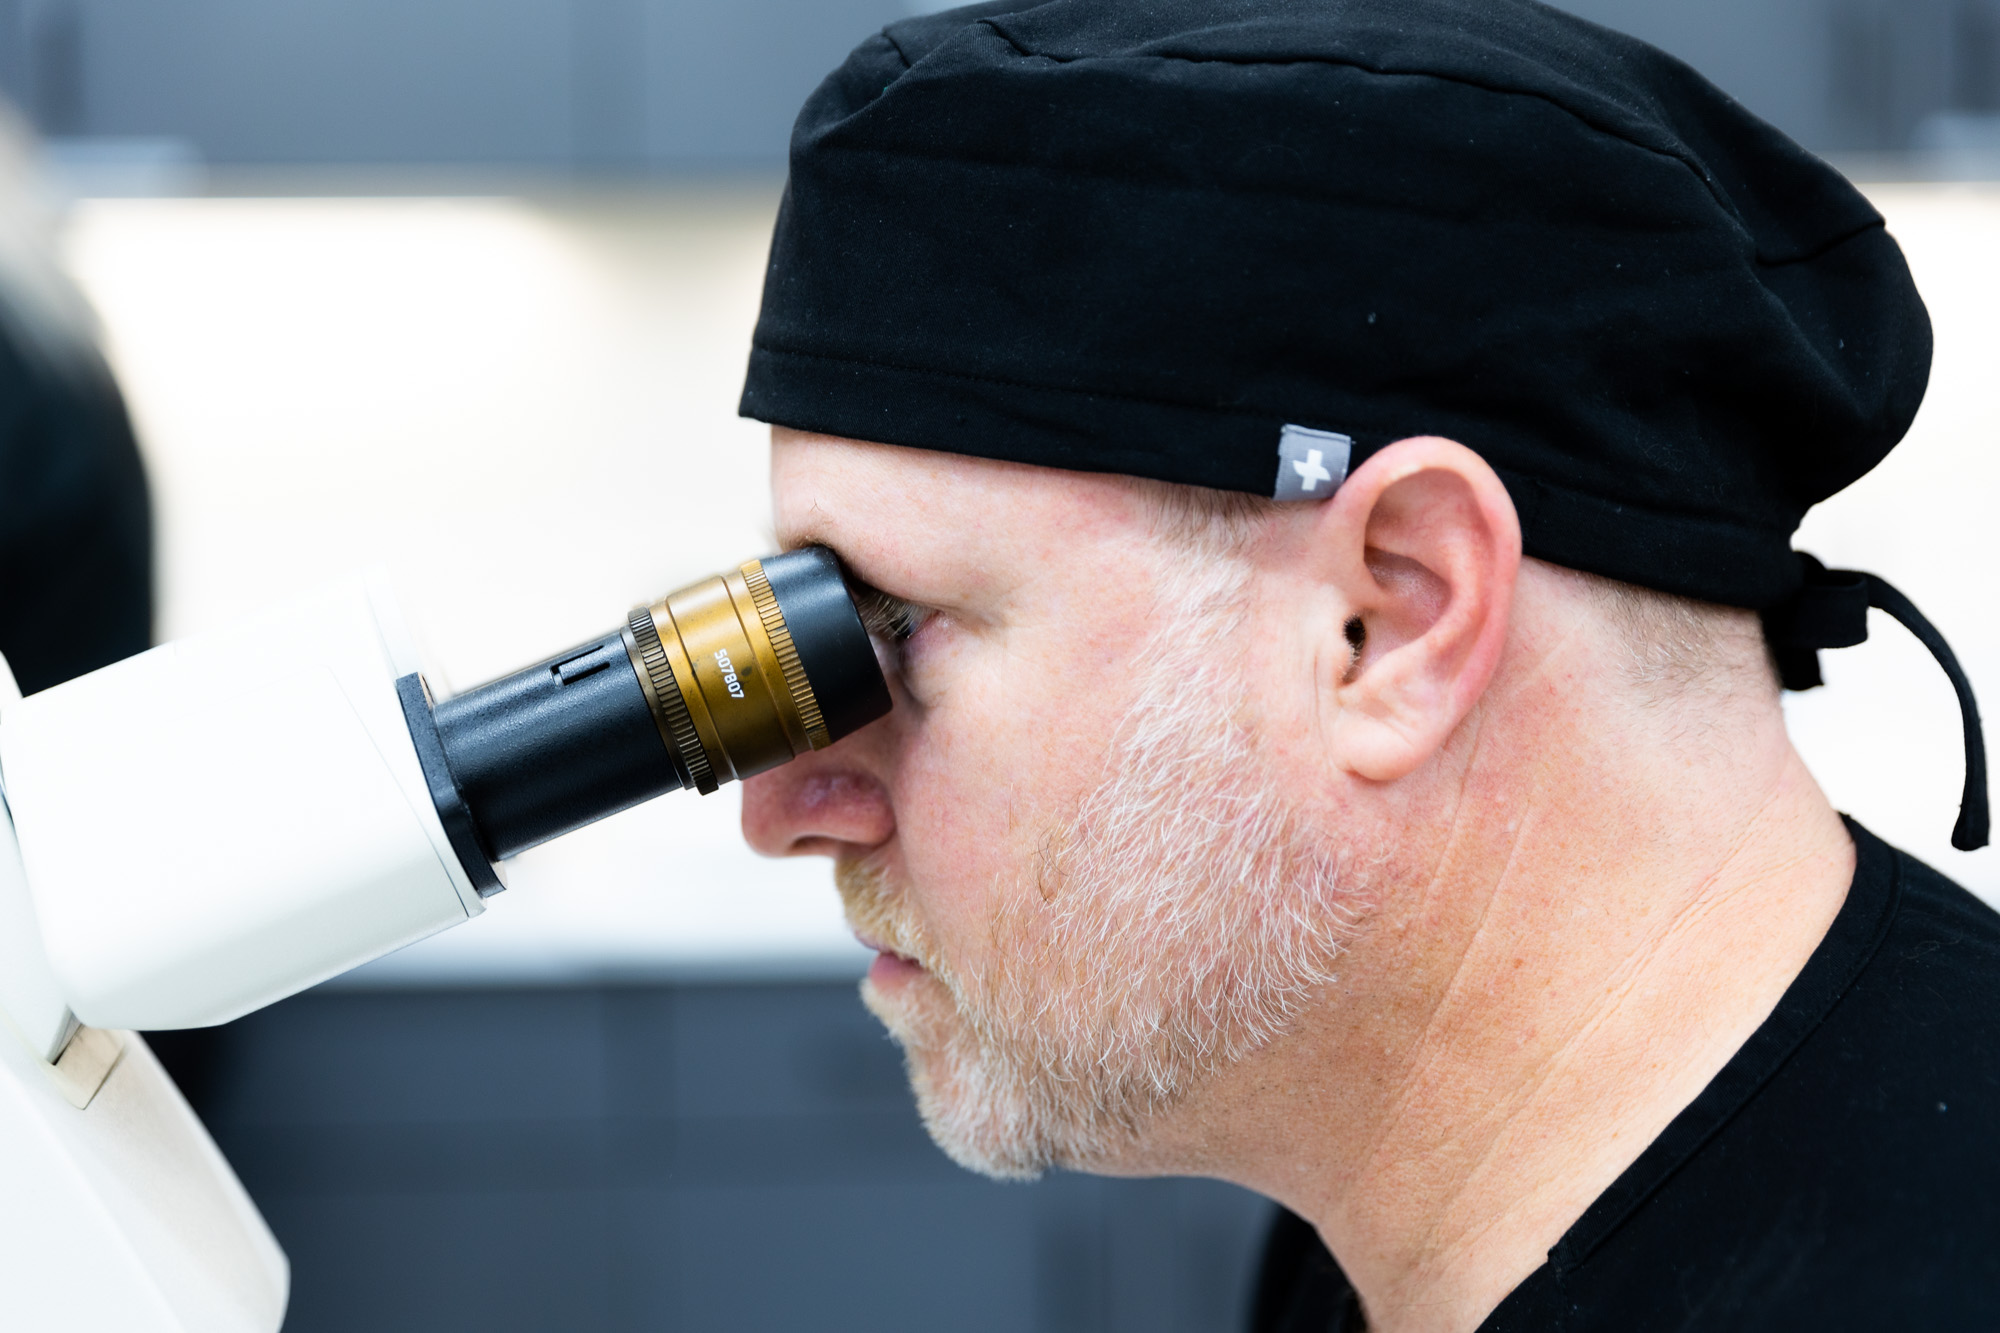 A Kansas City Skin and Cancer Center medical provider looks into a microscope in order to examine a sample. Only the provider's head and top of the microscope are visible.